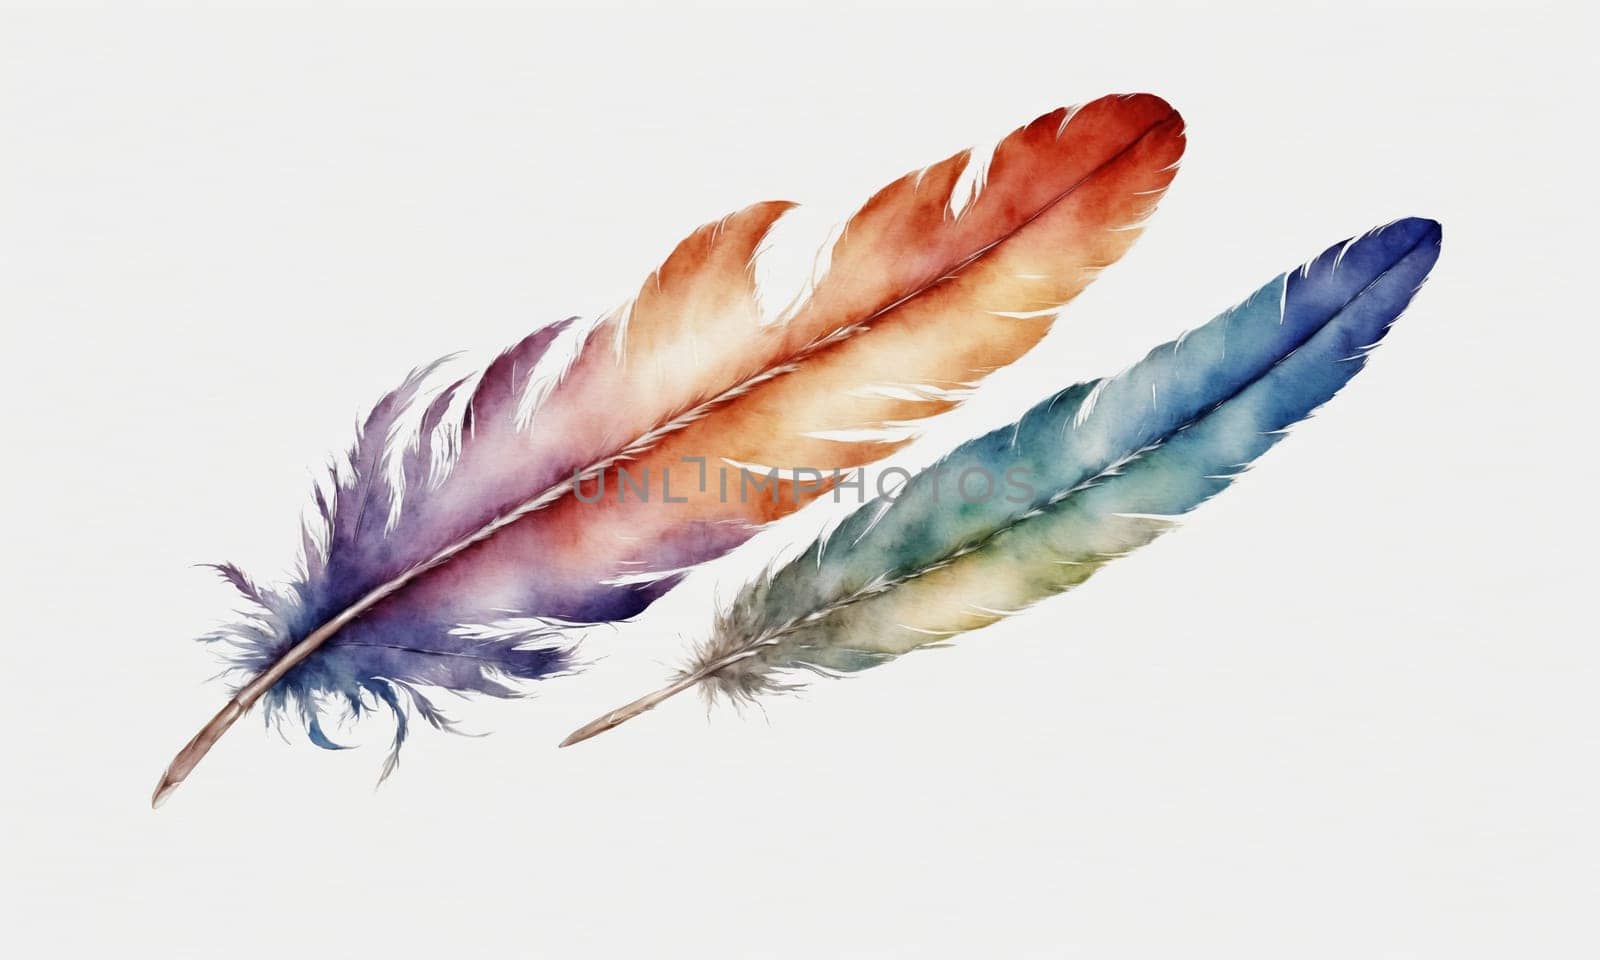 Watercolor feathers isolated on white background. Hand-drawn illustration